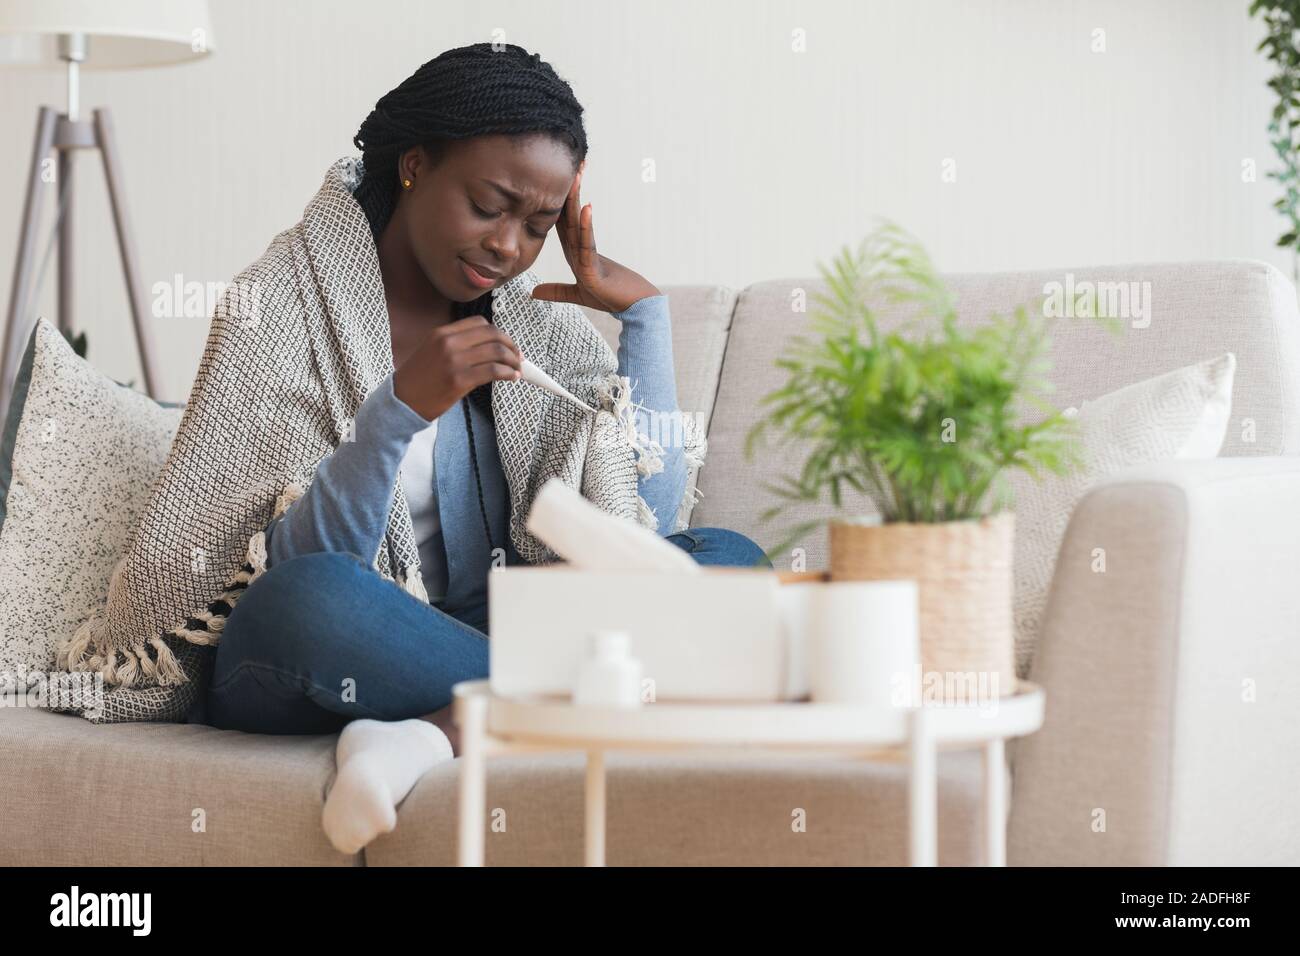 Sick black girl sitting on sofa with thermometer Stock Photo